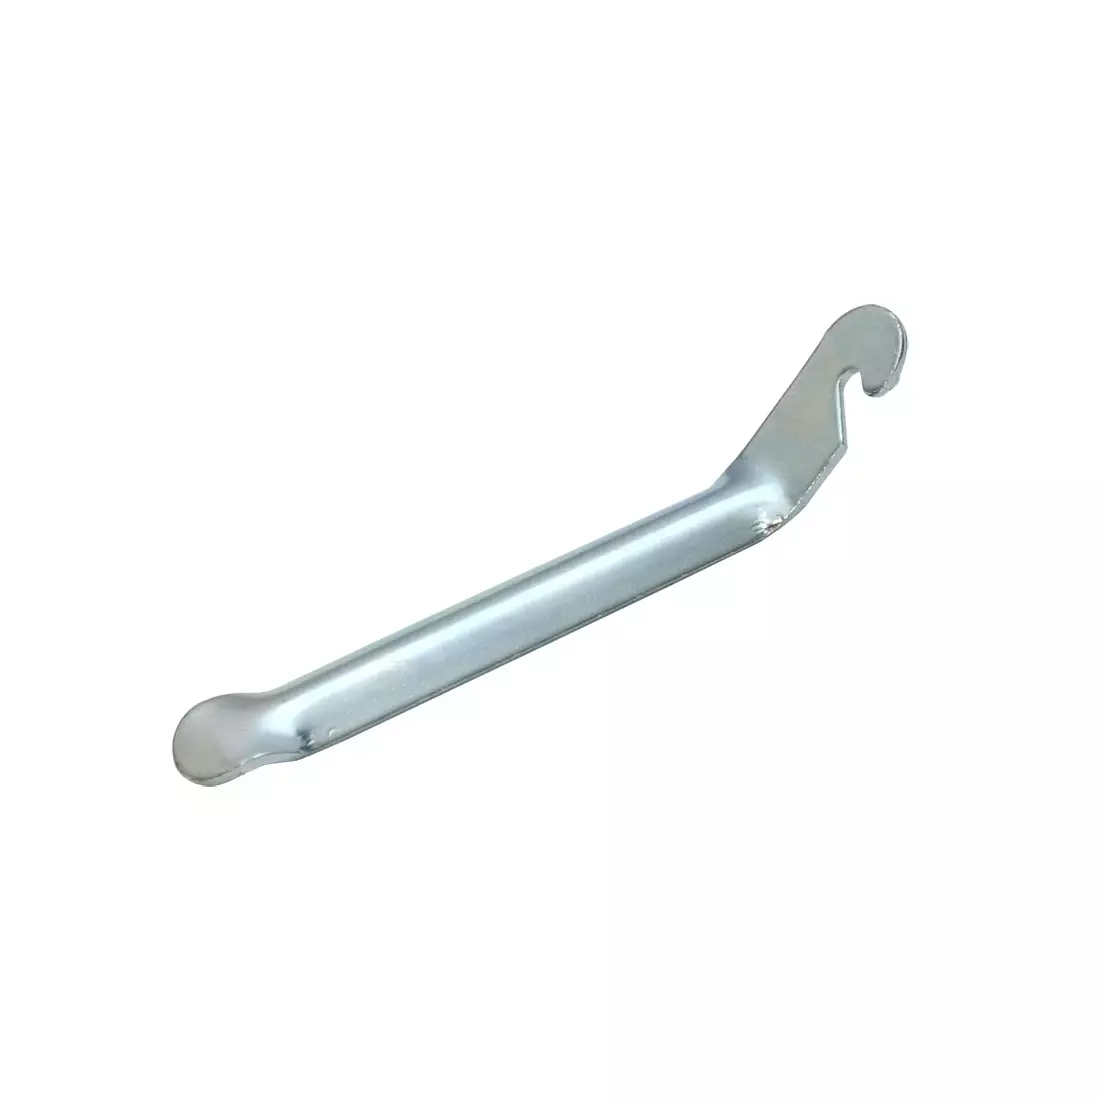 FORCE steel tire lever galvanized 89453